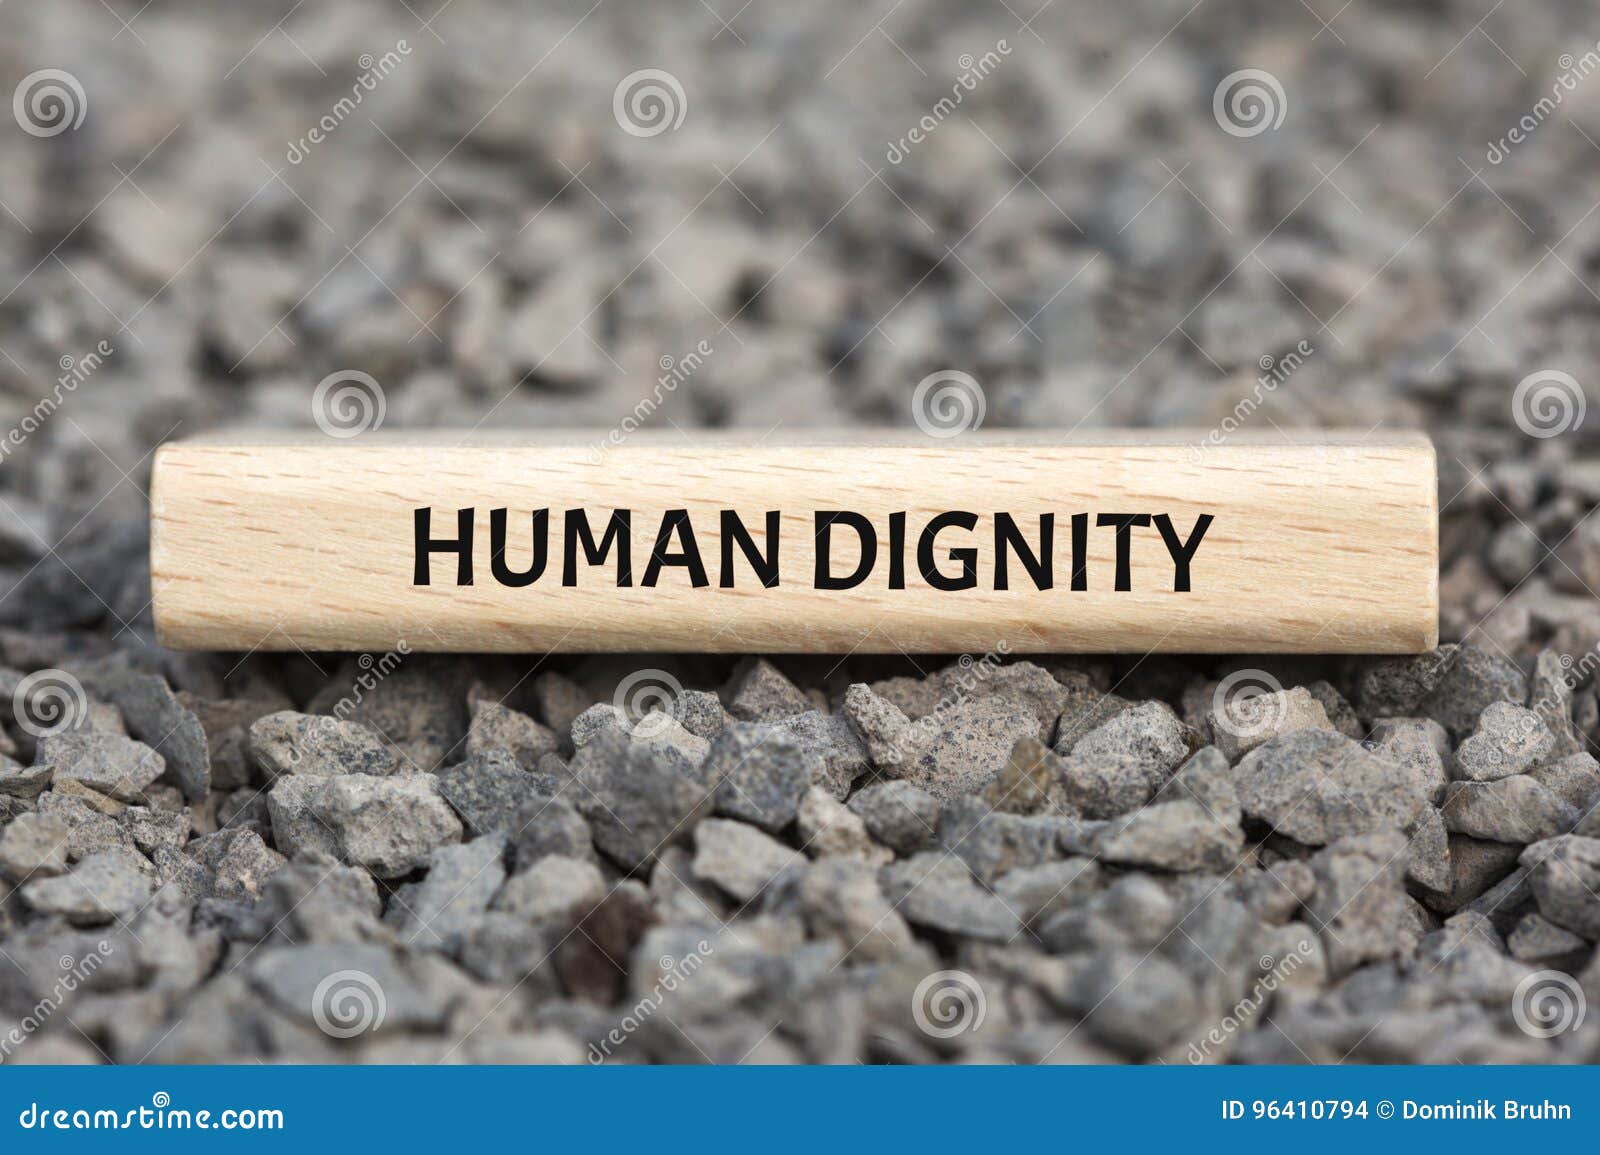 human dignity - image with words associated with the topic community of values, word, image, 